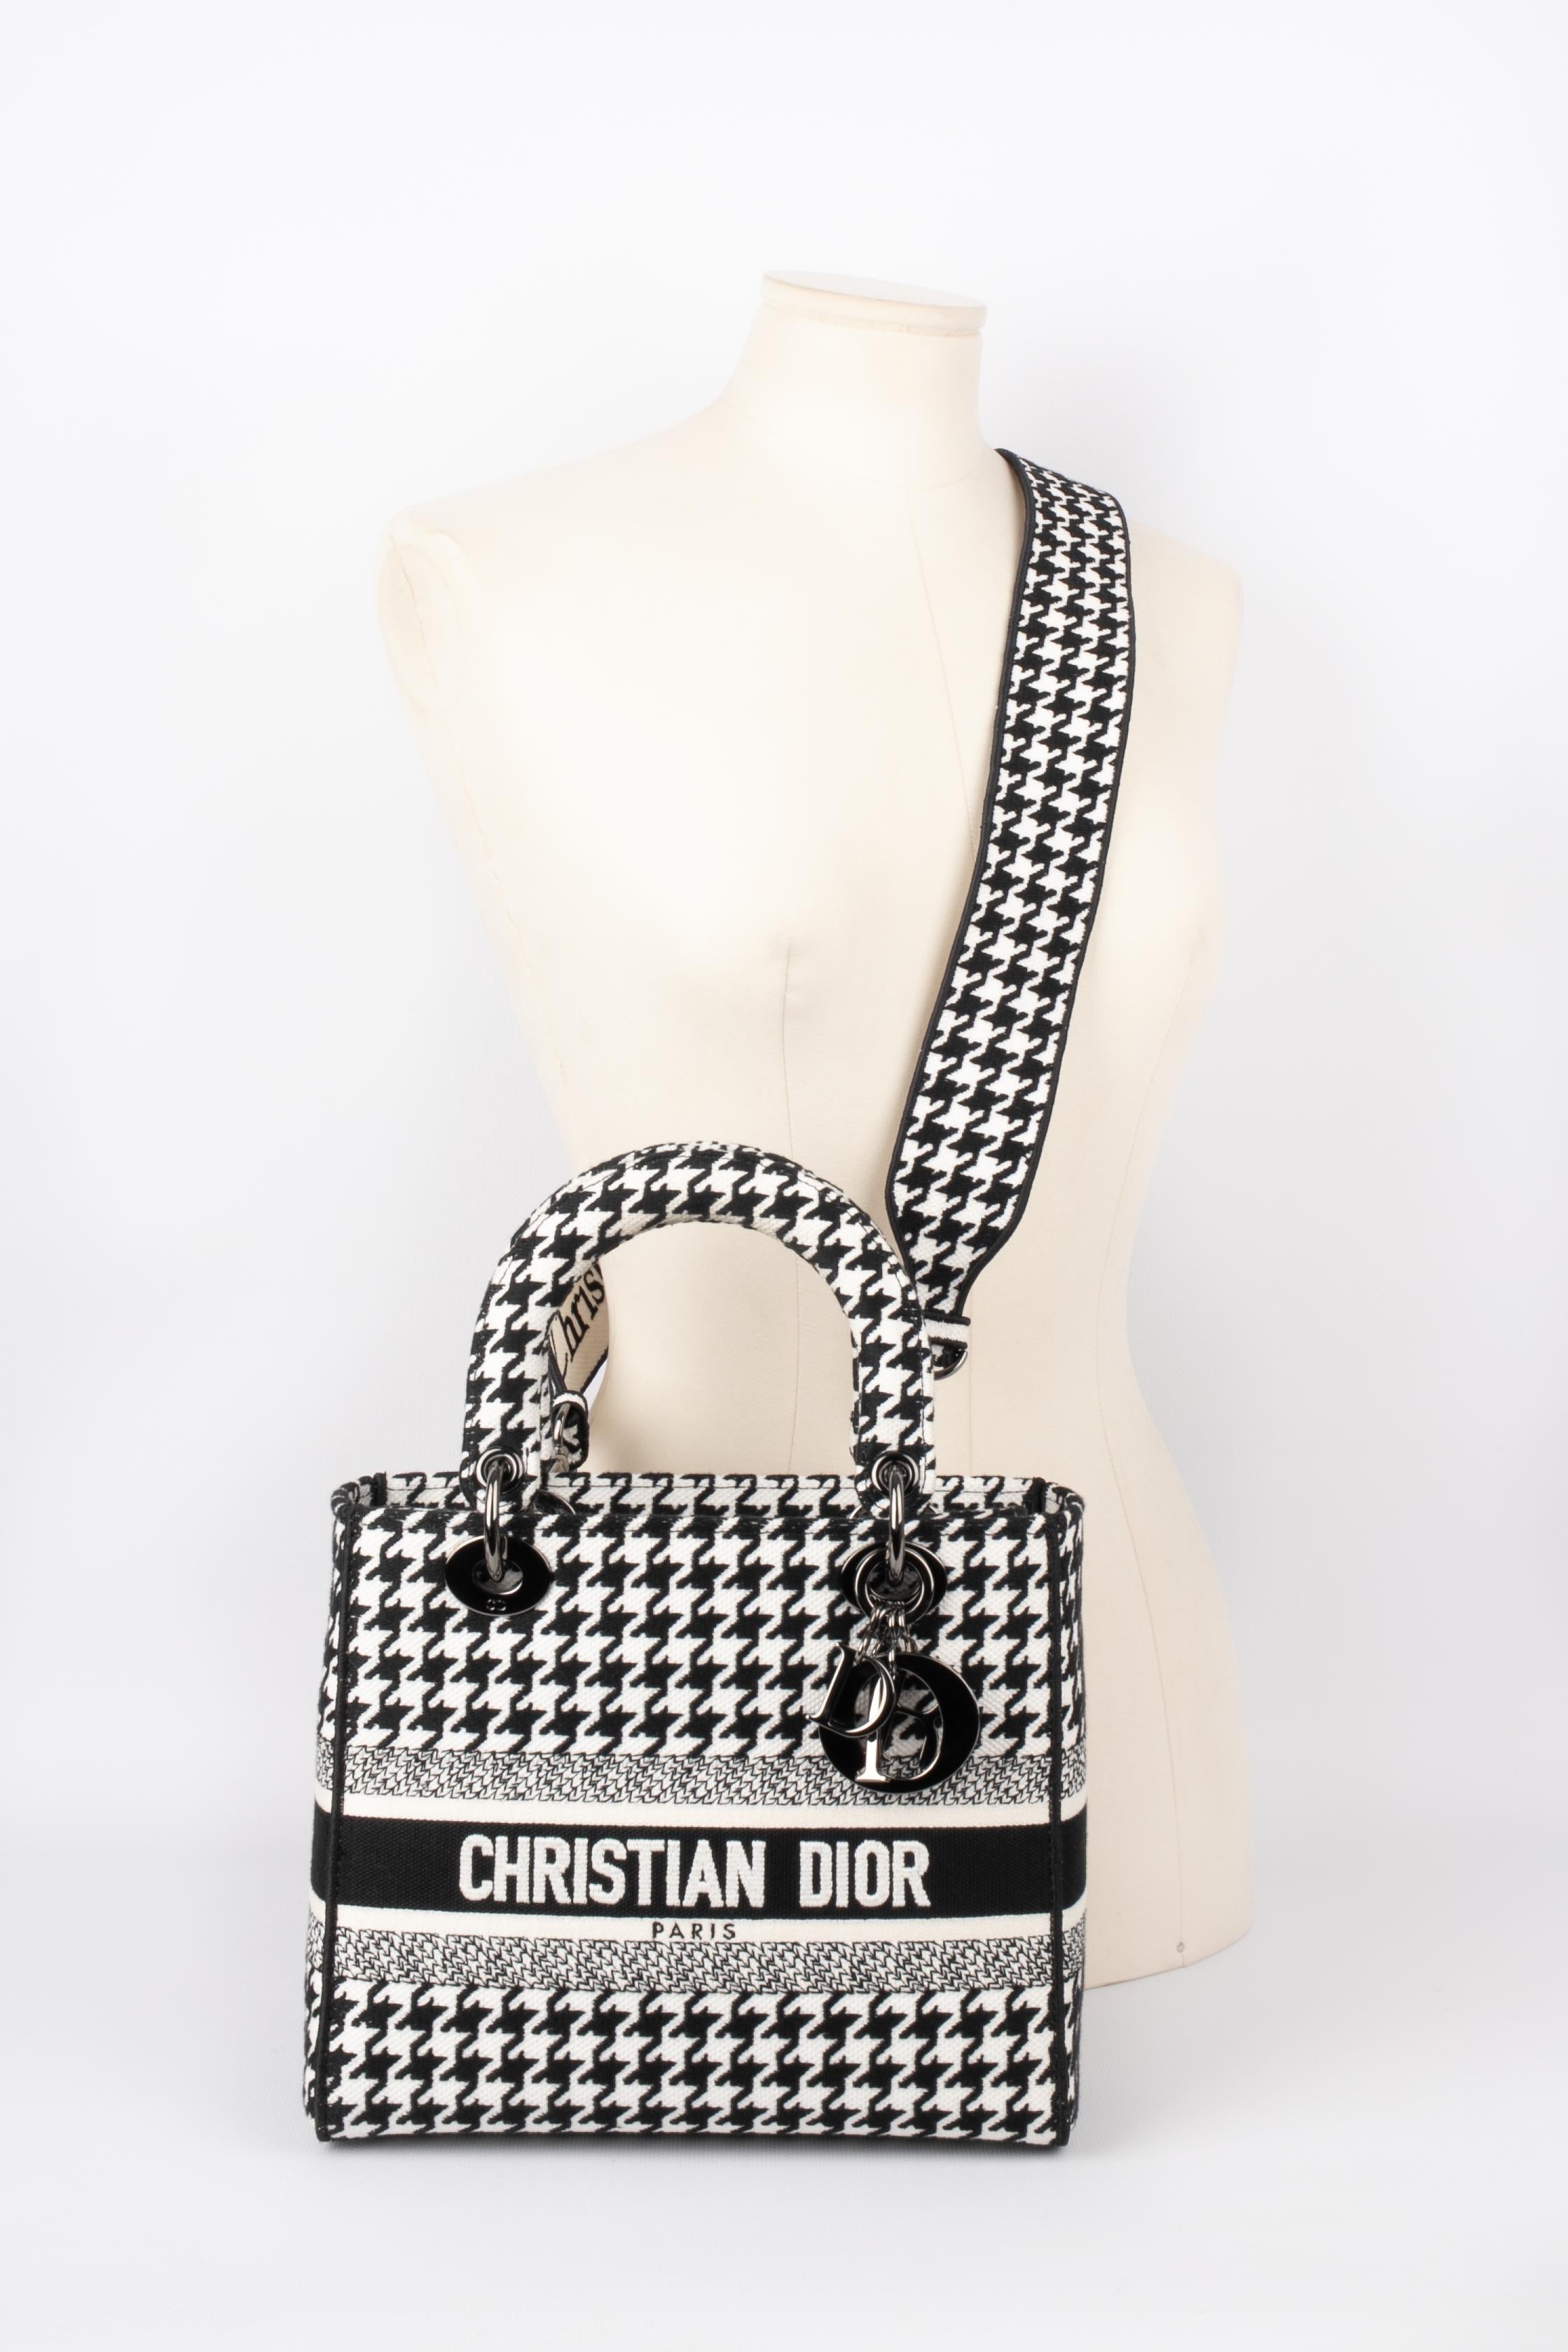 DIOR - Lady Dior bag in black and white houndstooth canvas, double handle, one of which holds charms bearing the name of the House, removable shoulder strap. Serial number present, collection 2022.

Condition:
Very good condition

Dimensions